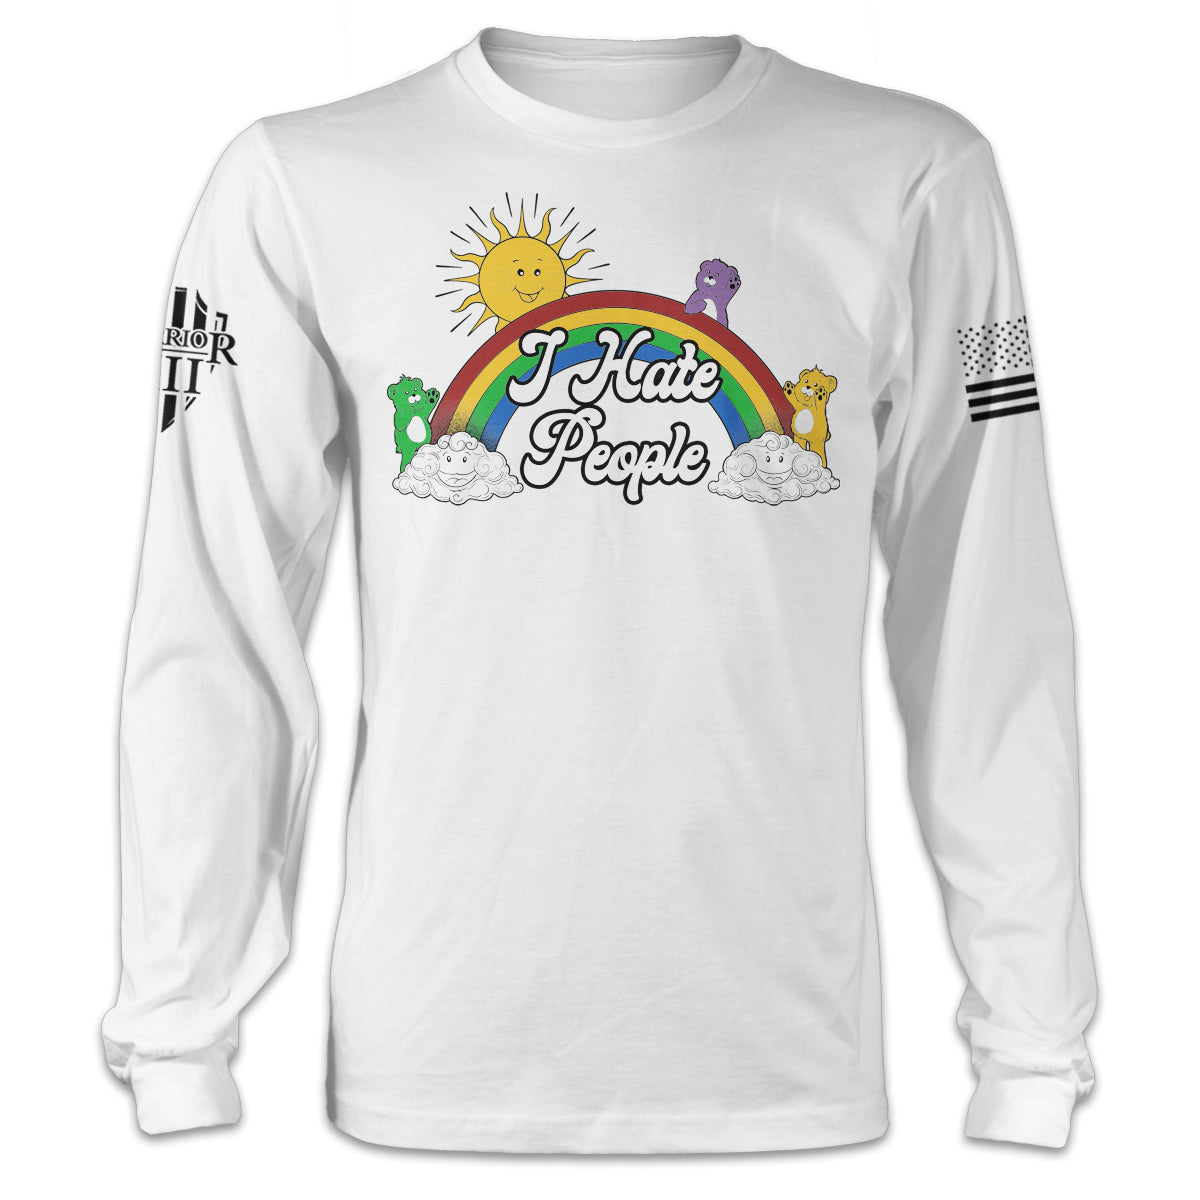 A white long sleeve with the words "I Hate People" with bears, rainbow and clouds printed on the front of the shirt.